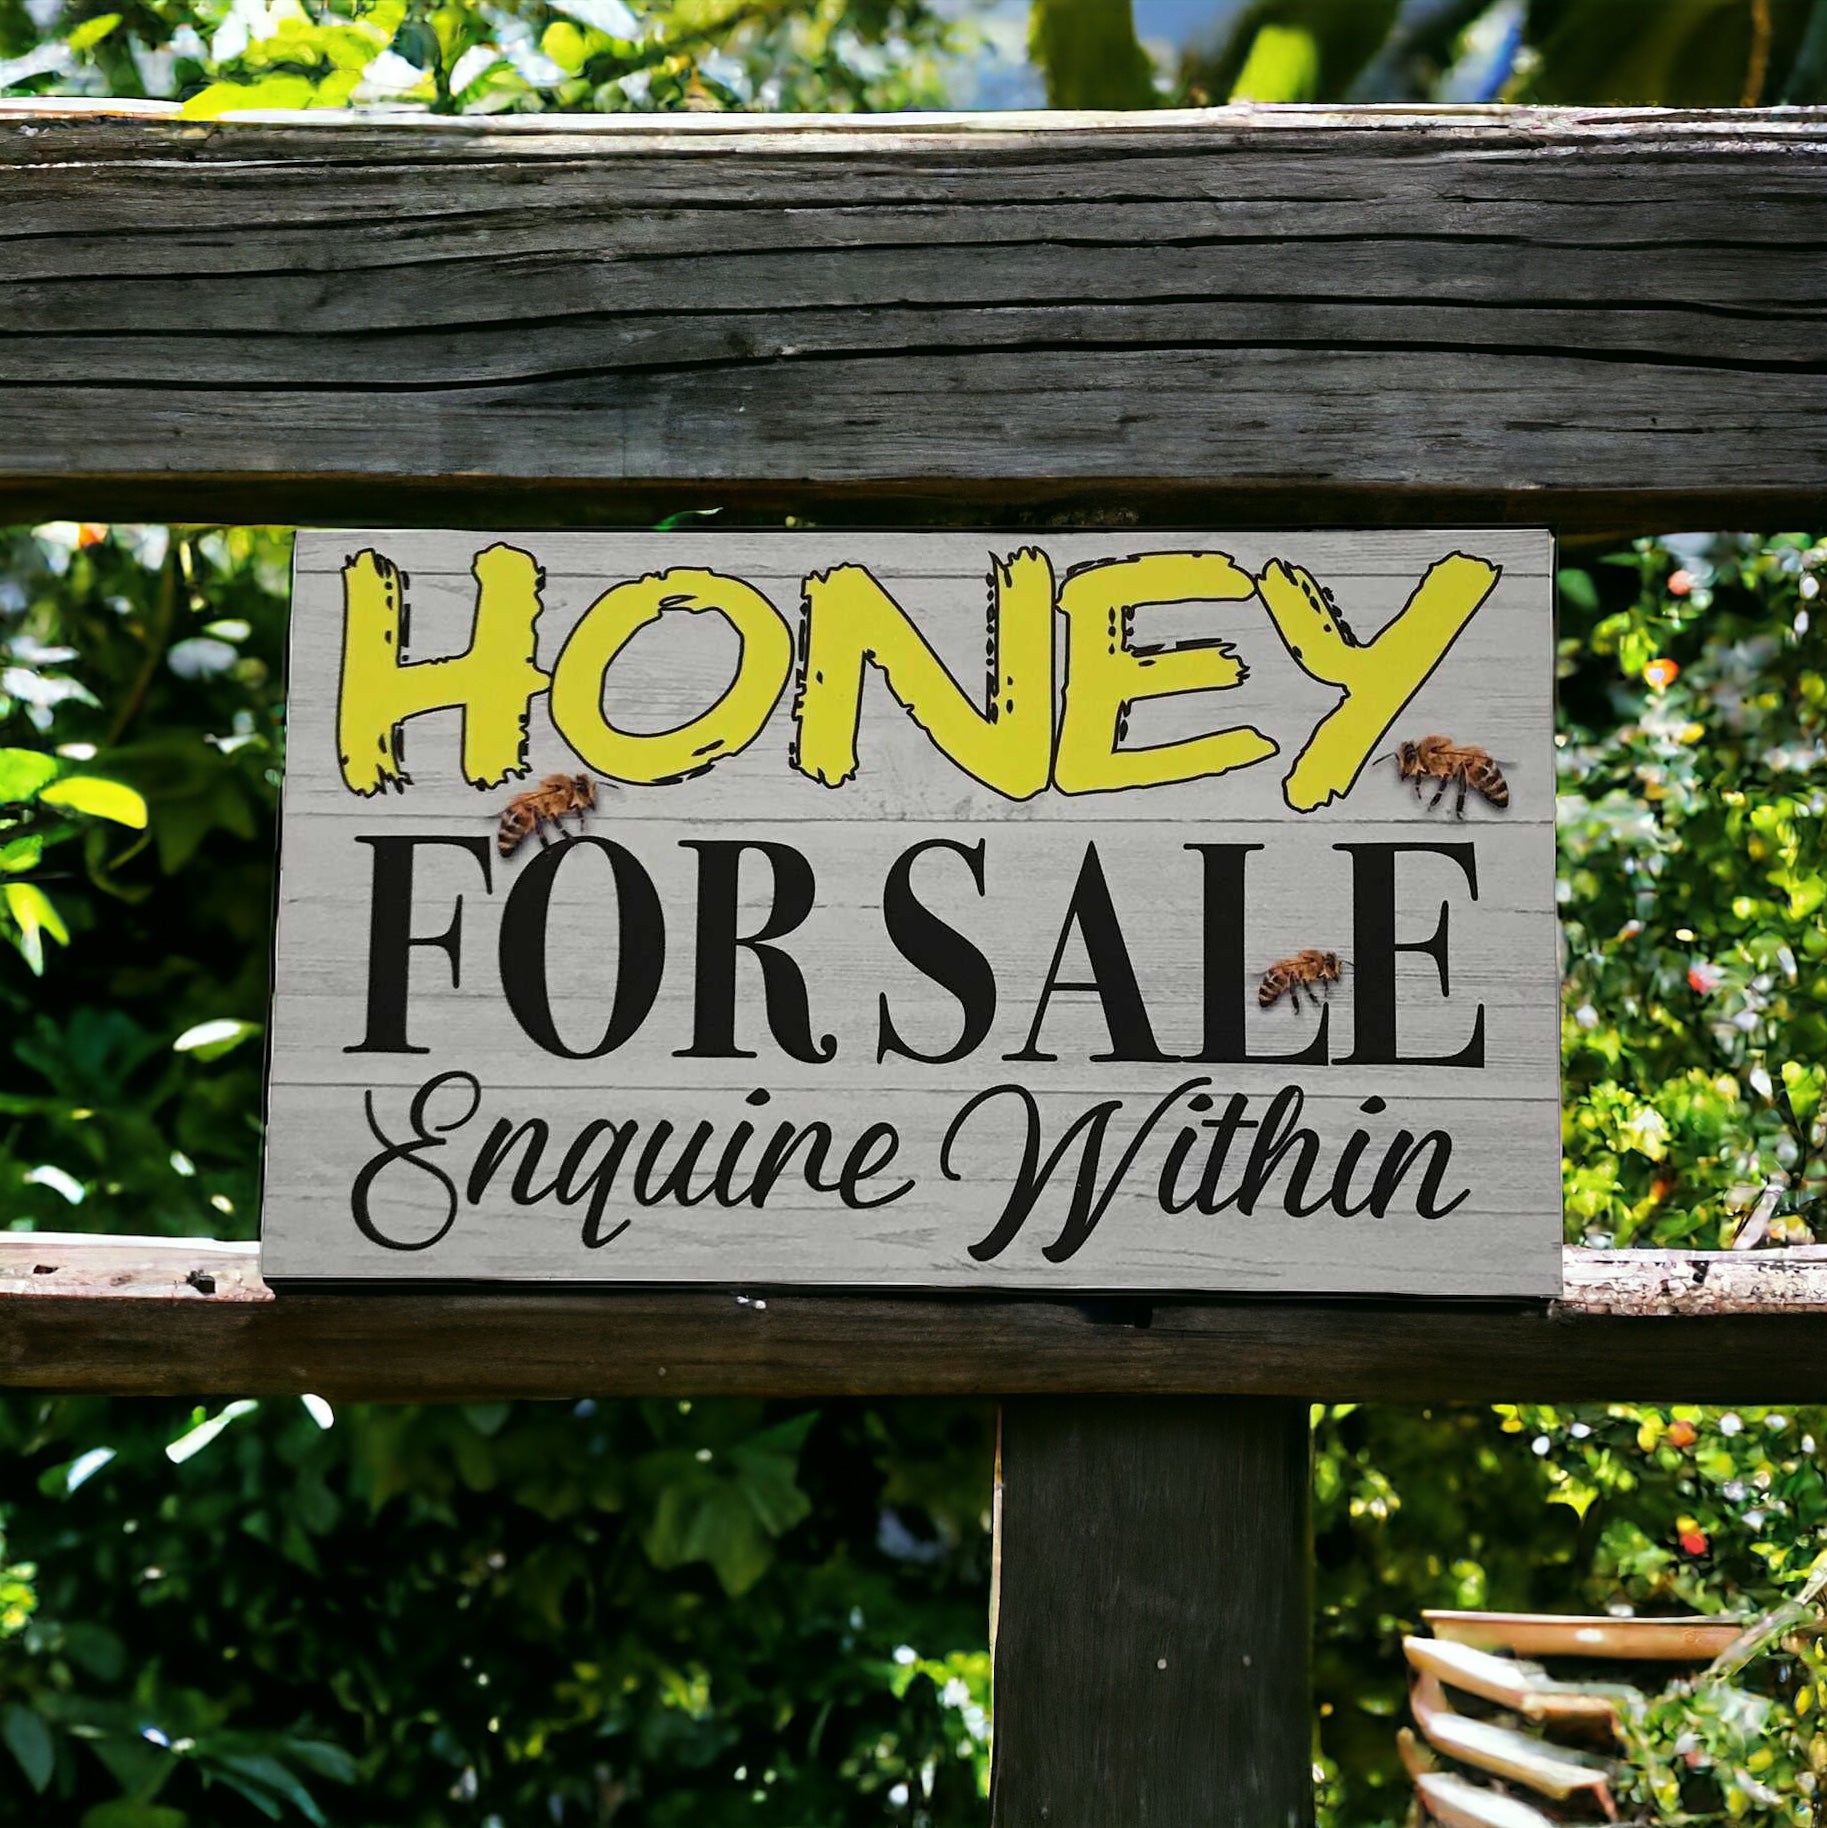 Honey For Sale Enquire Within Bee Sign - The Renmy Store Homewares & Gifts 